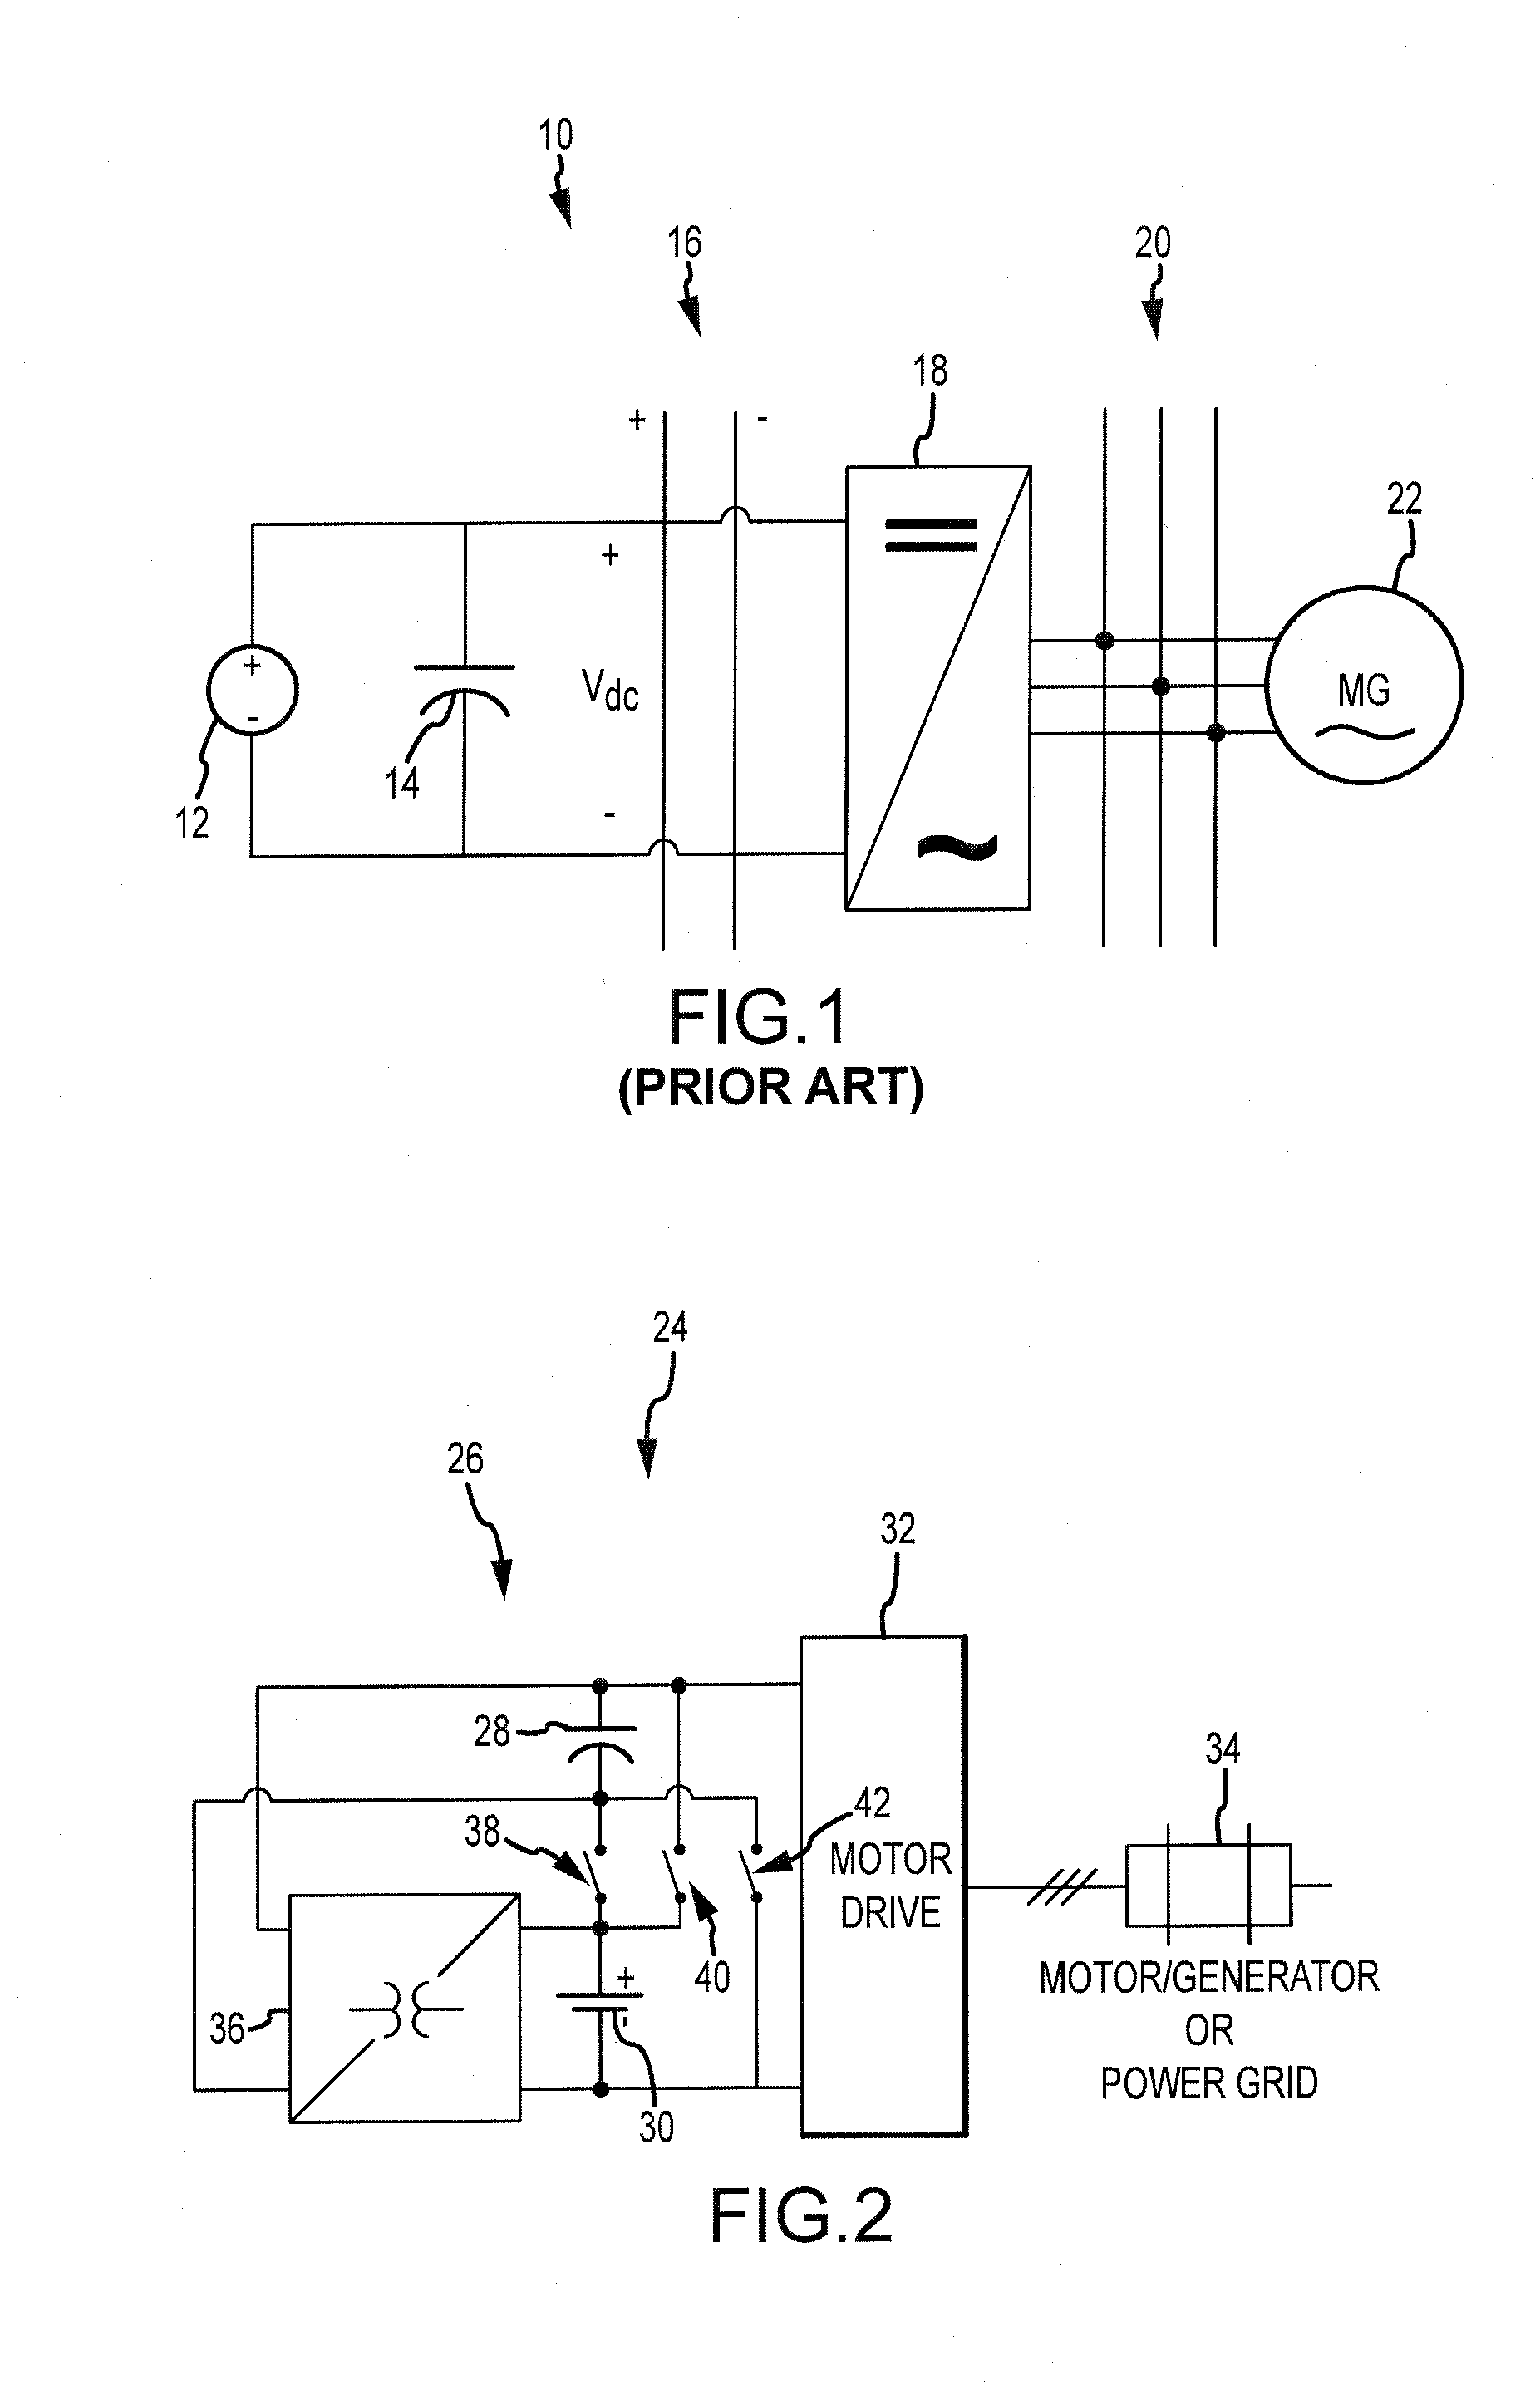 Method of energy and power management in dynamic power systems with ultra-capacitors (super capacitors)